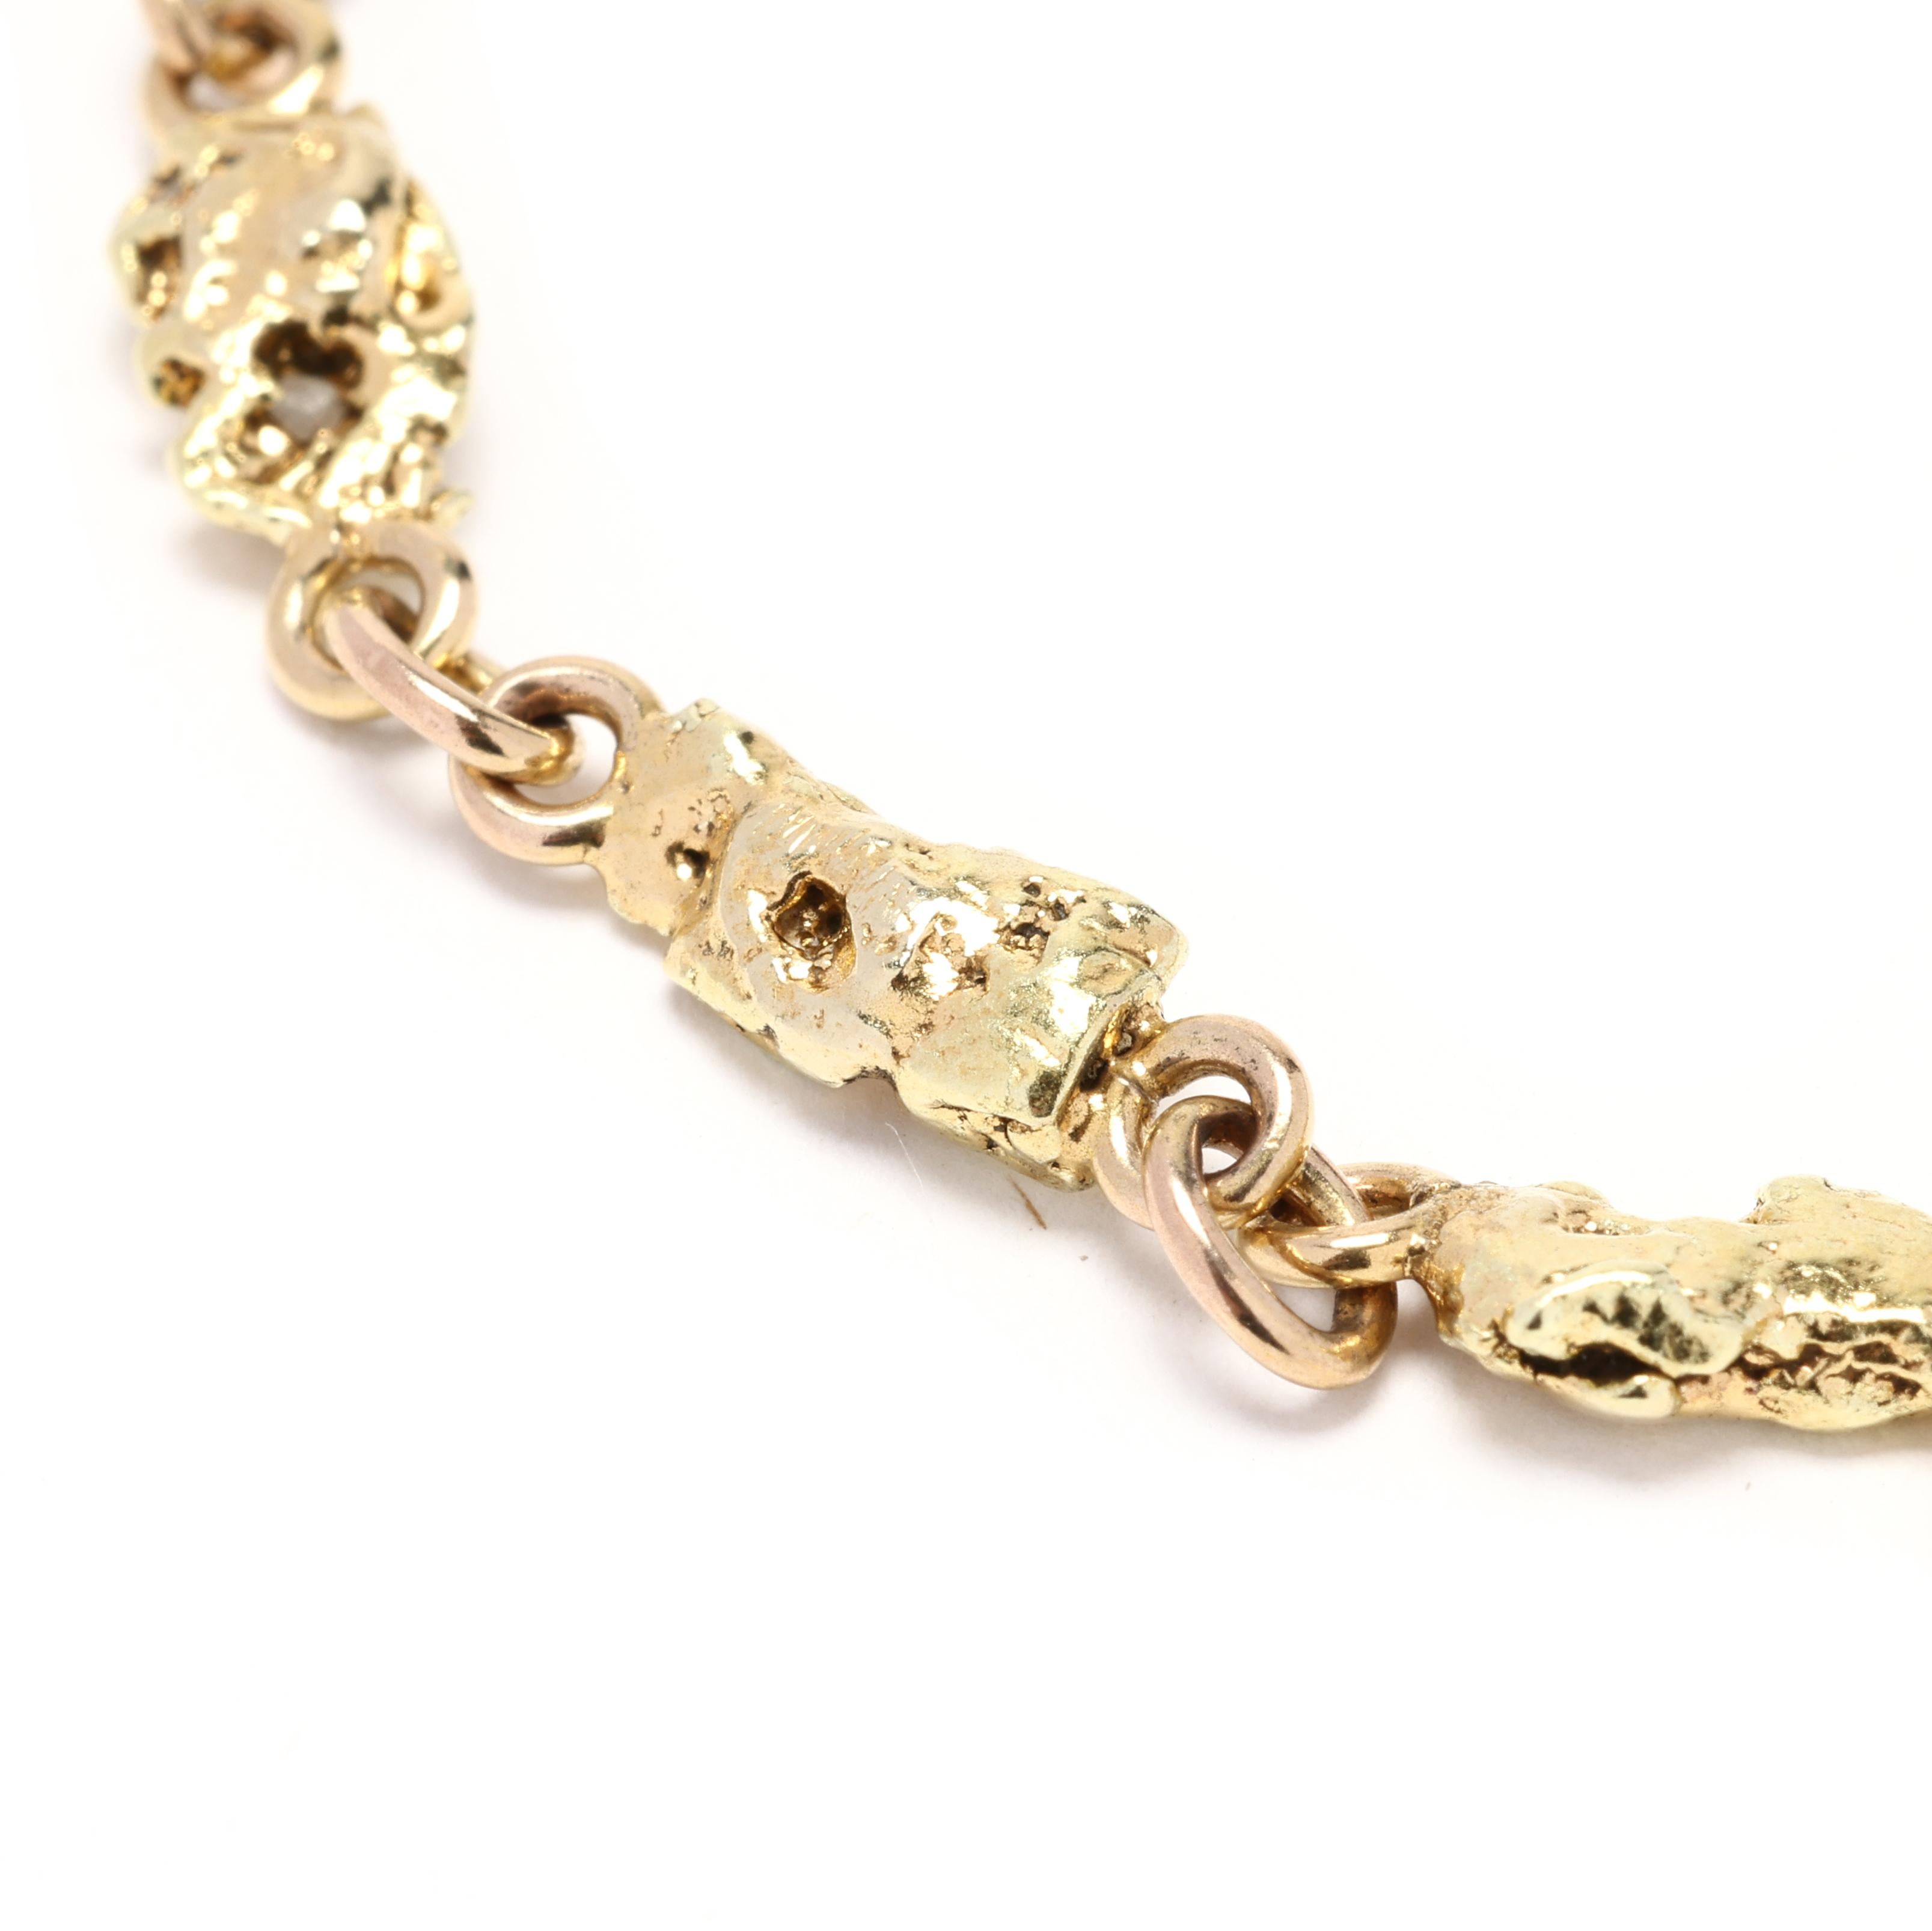 Elevate your style with this exquisite 14k Gold Nugget Bracelet. Featuring genuine gold nuggets elegantly set on an 18k yellow gold chain, this bracelet exudes luxury and sophistication. With its versatile design and perfect length of 7.13 inches,